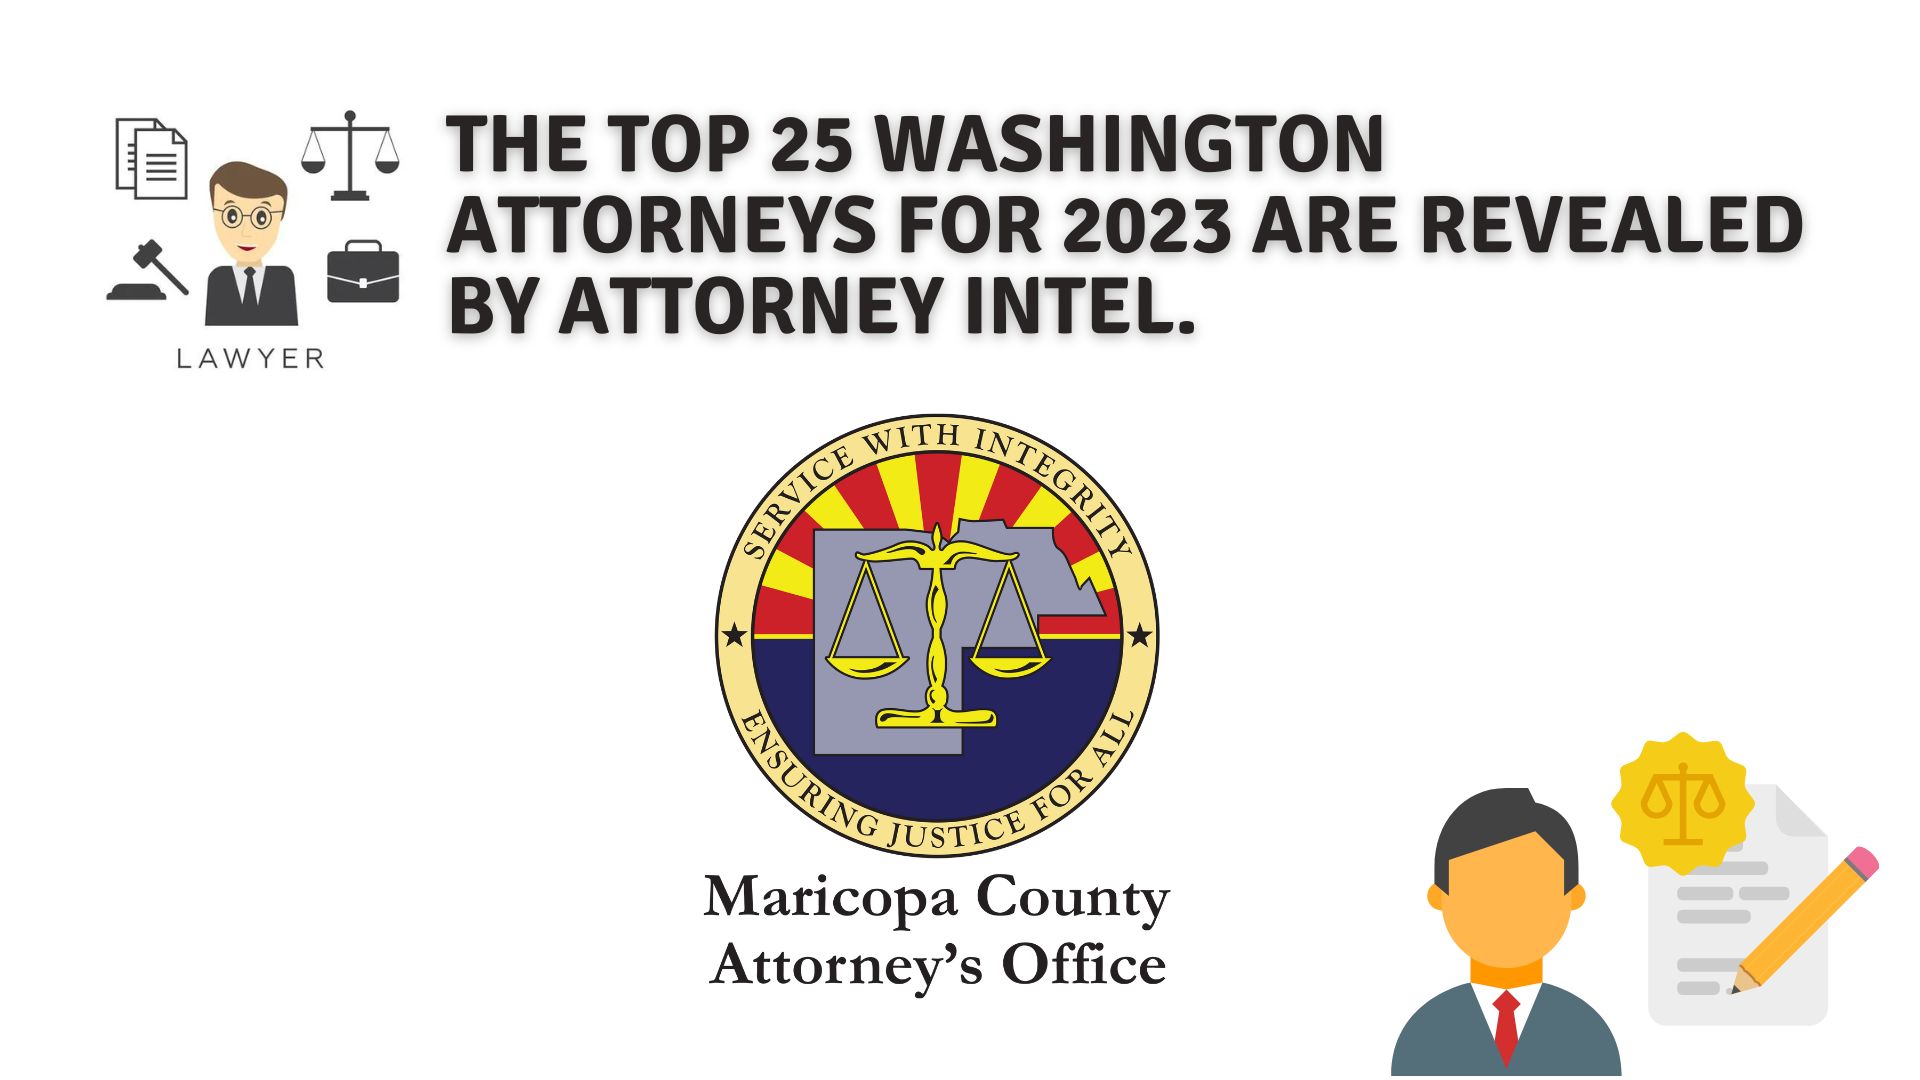 The top 25 washington attorneys for 2023 are revealed by attorney intel.